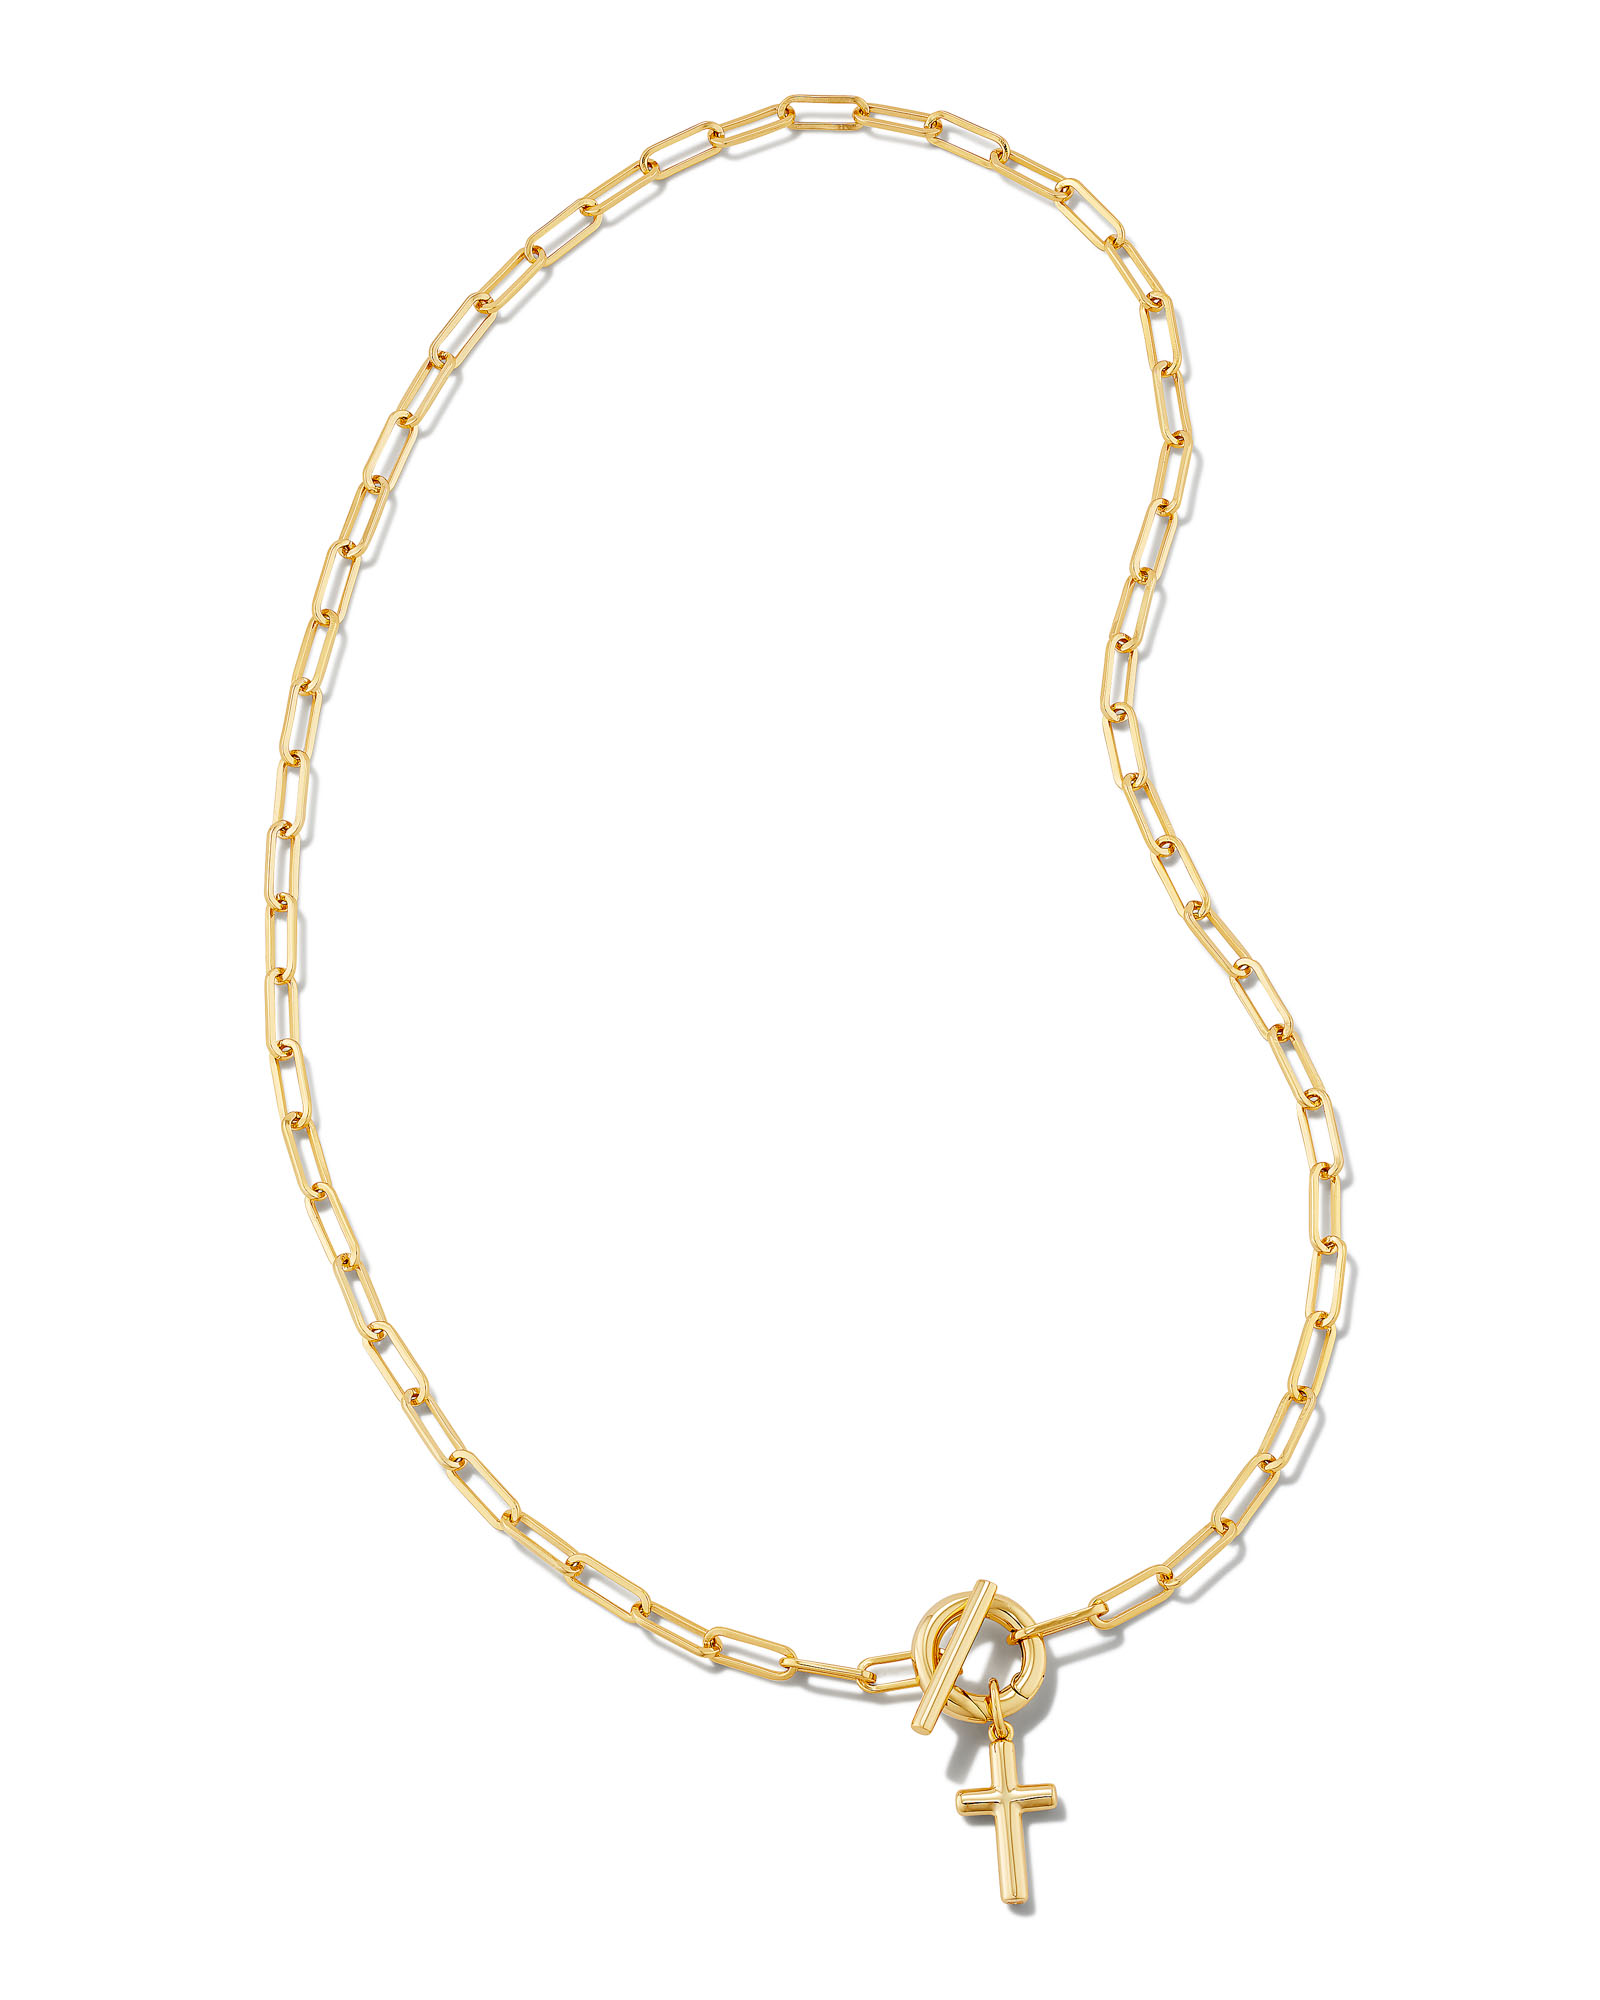 Olivia Cross Chain Necklace in Gold | Kendra Scott